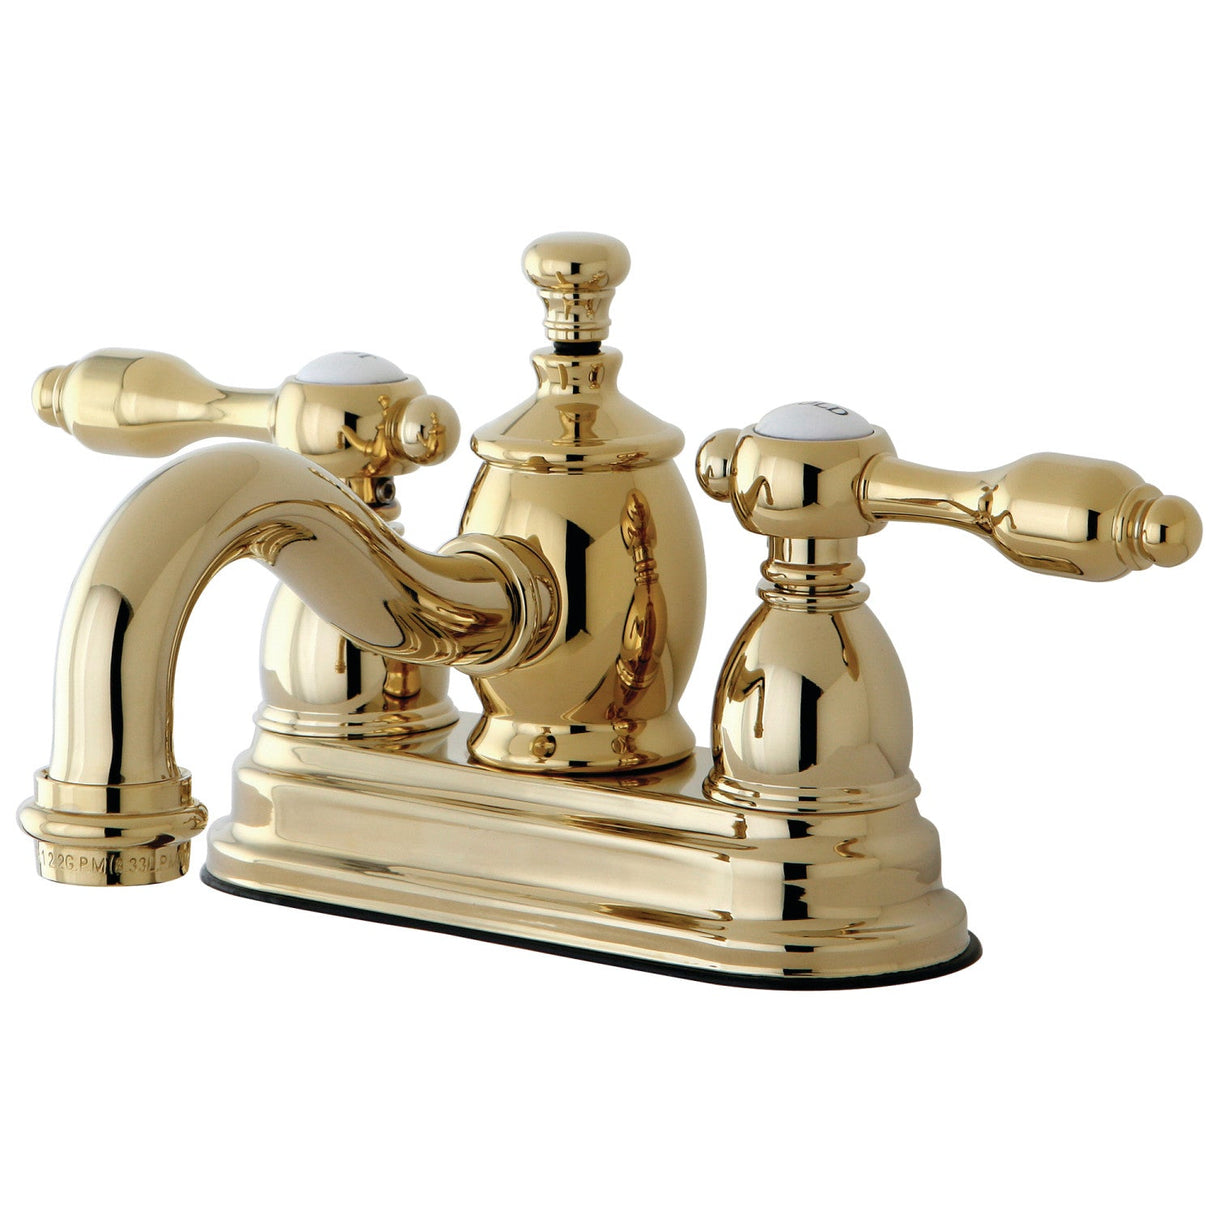 Tudor KS7102TAL Two-Handle 3-Hole Deck Mount 4" Centerset Bathroom Faucet with Brass Pop-Up, Polished Brass